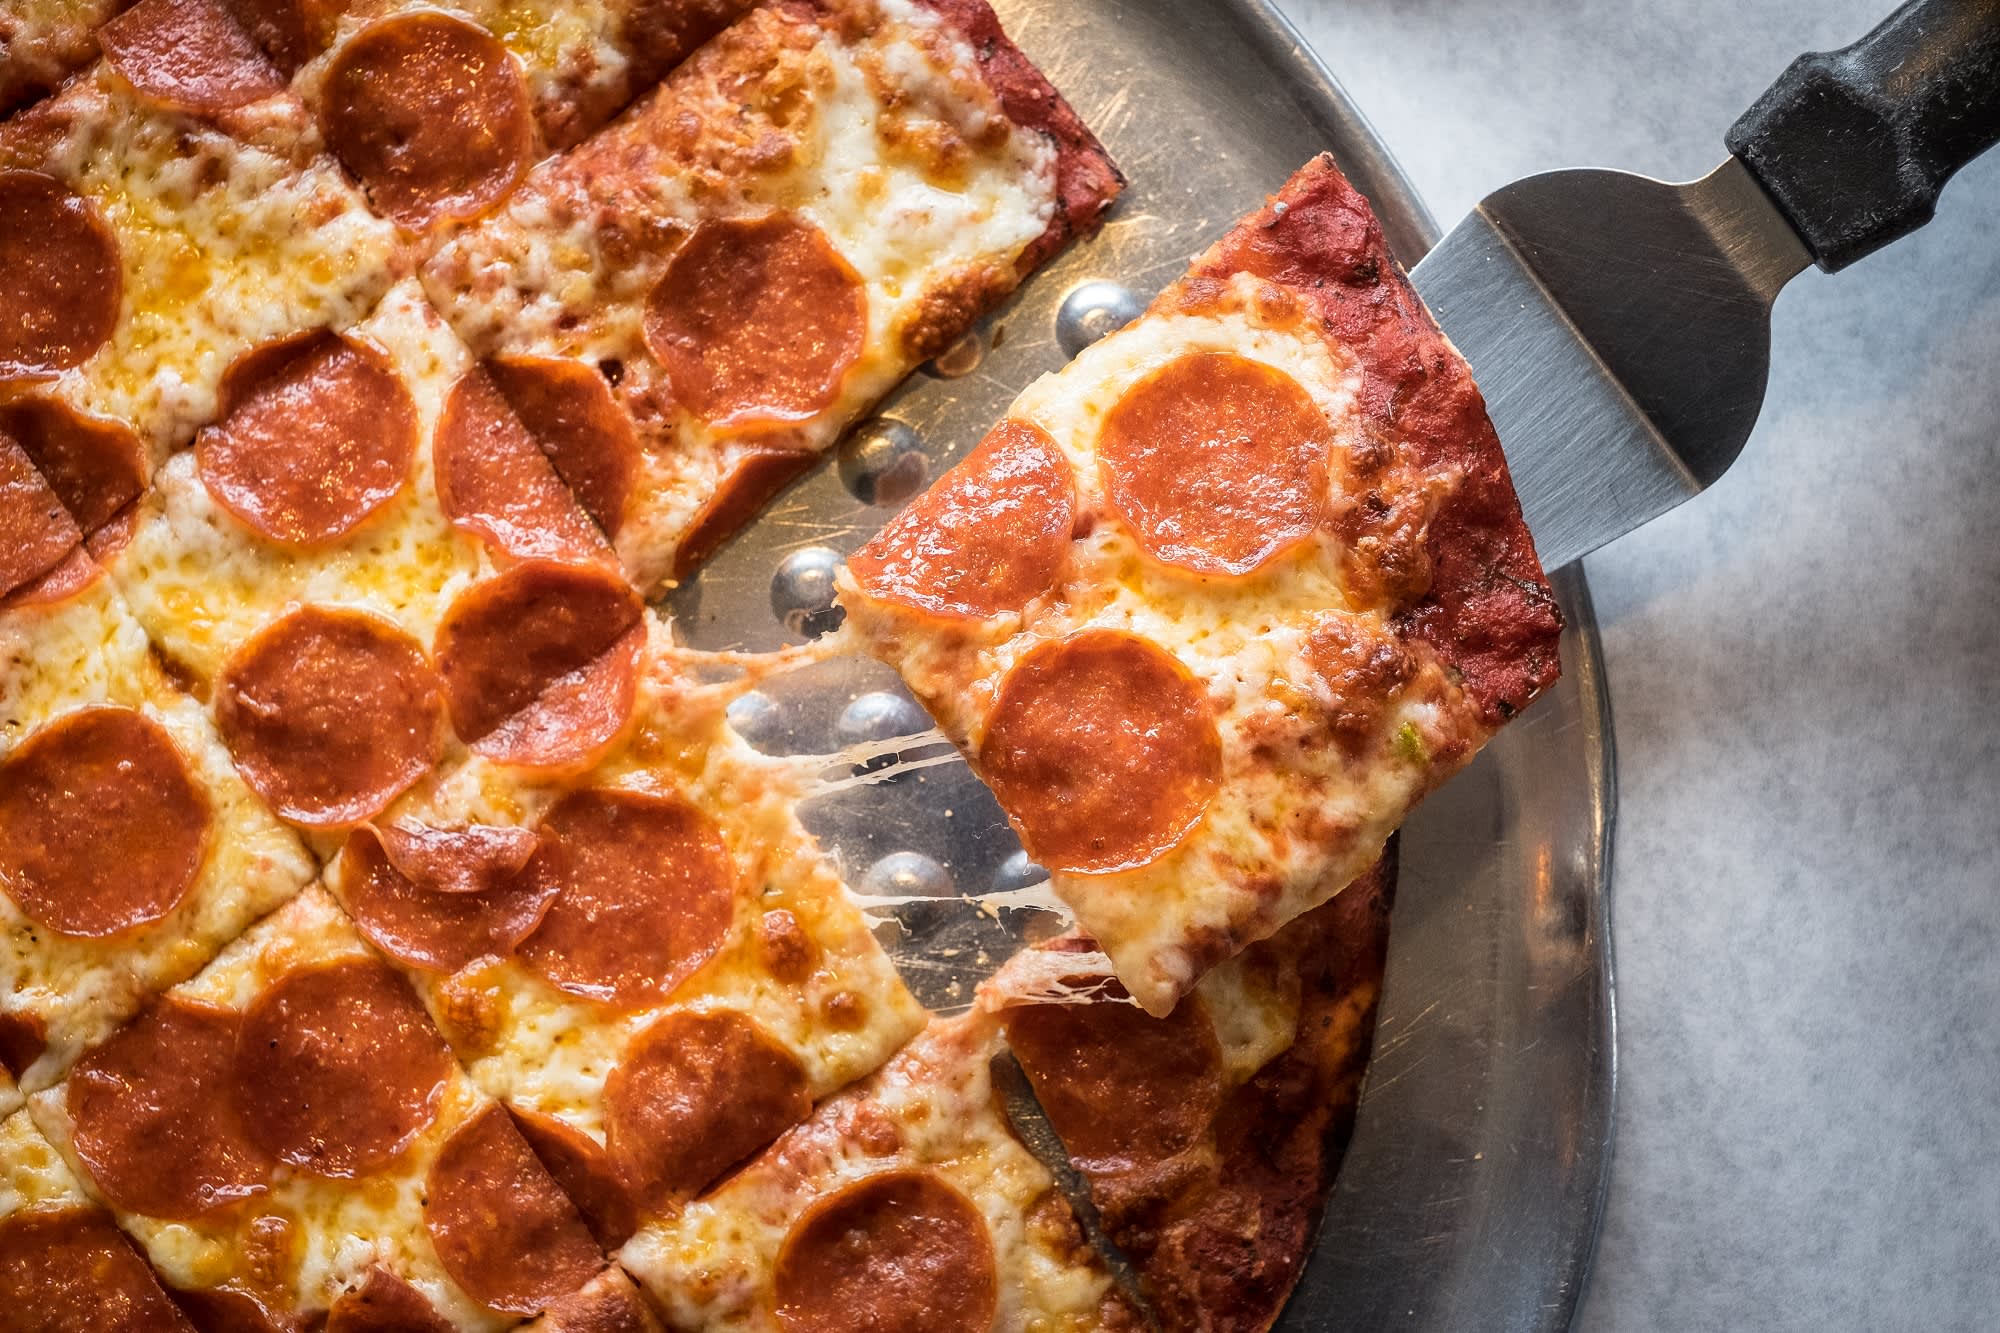 Americans Still Prefer Delivery, Takeout to Eating at a Restaurant - PMQ  Pizza Magazine